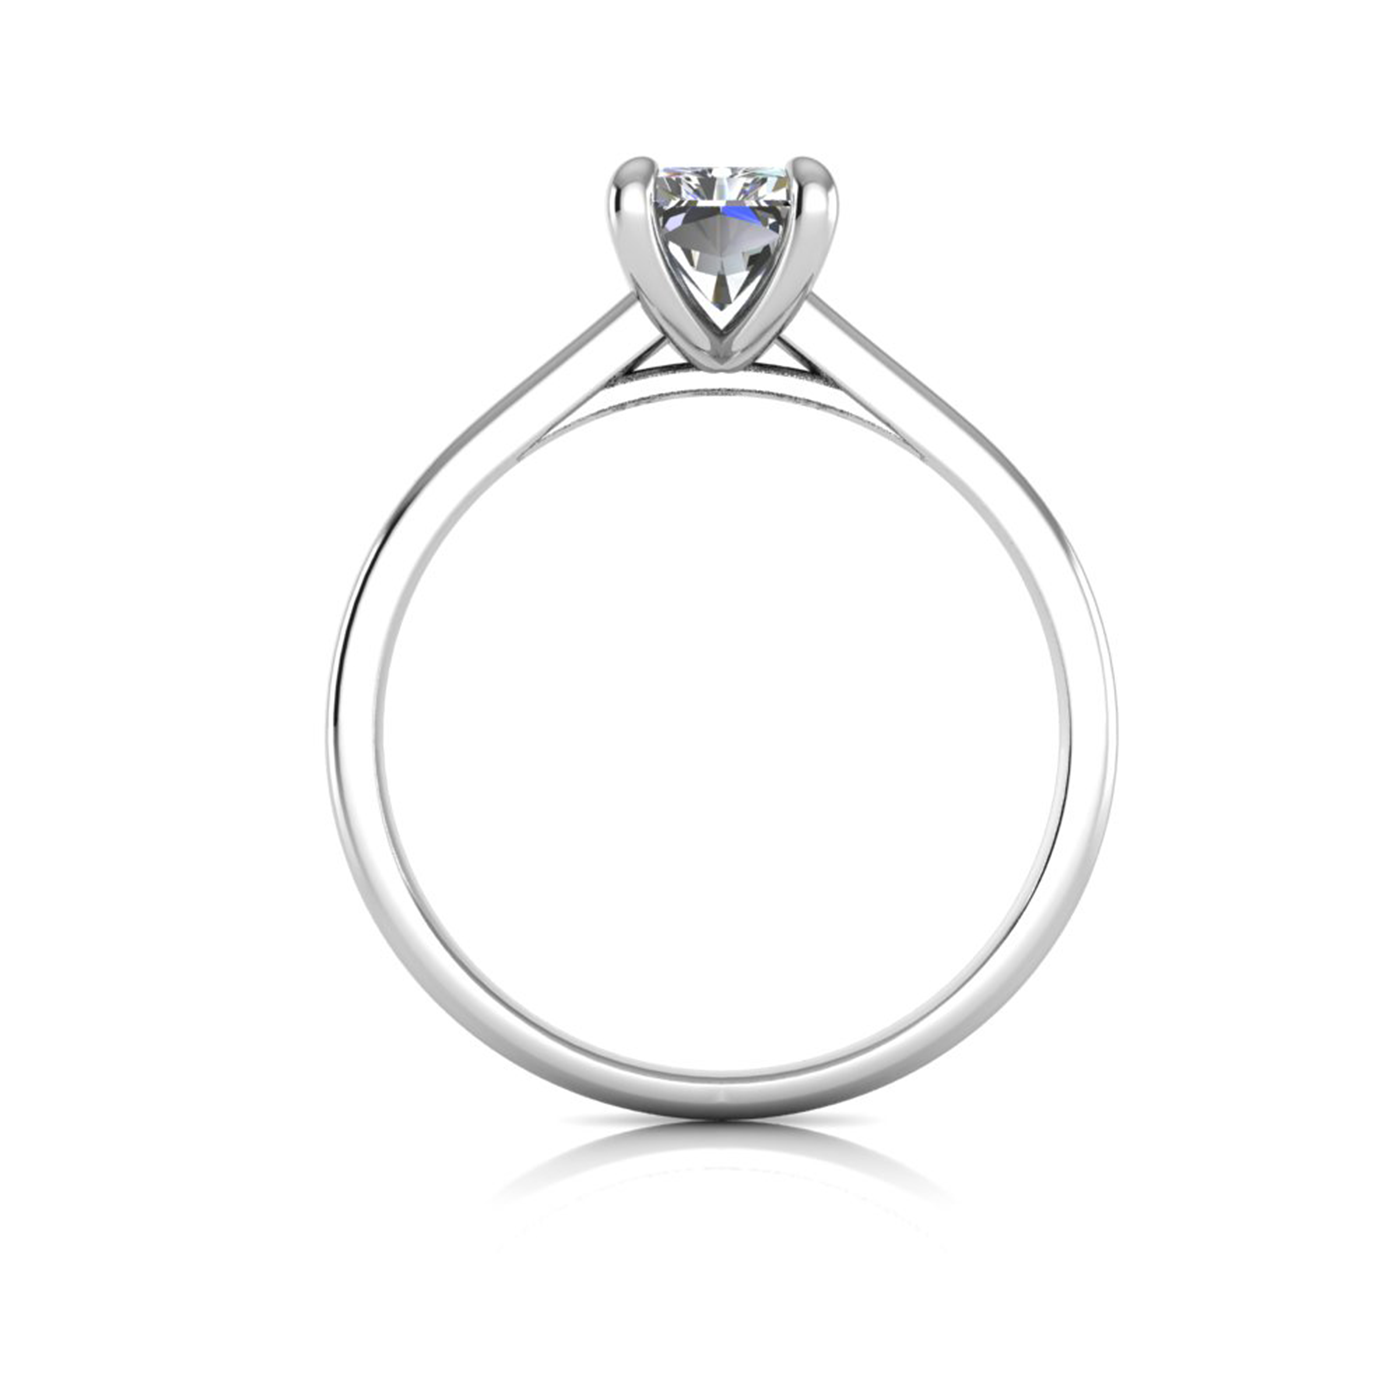 18K WHITE GOLD 4 PRONGS SOLITAIRE RADIANT CUT DIAMOND ENGAGEMENT RING WITH WHISPER THIN BAND